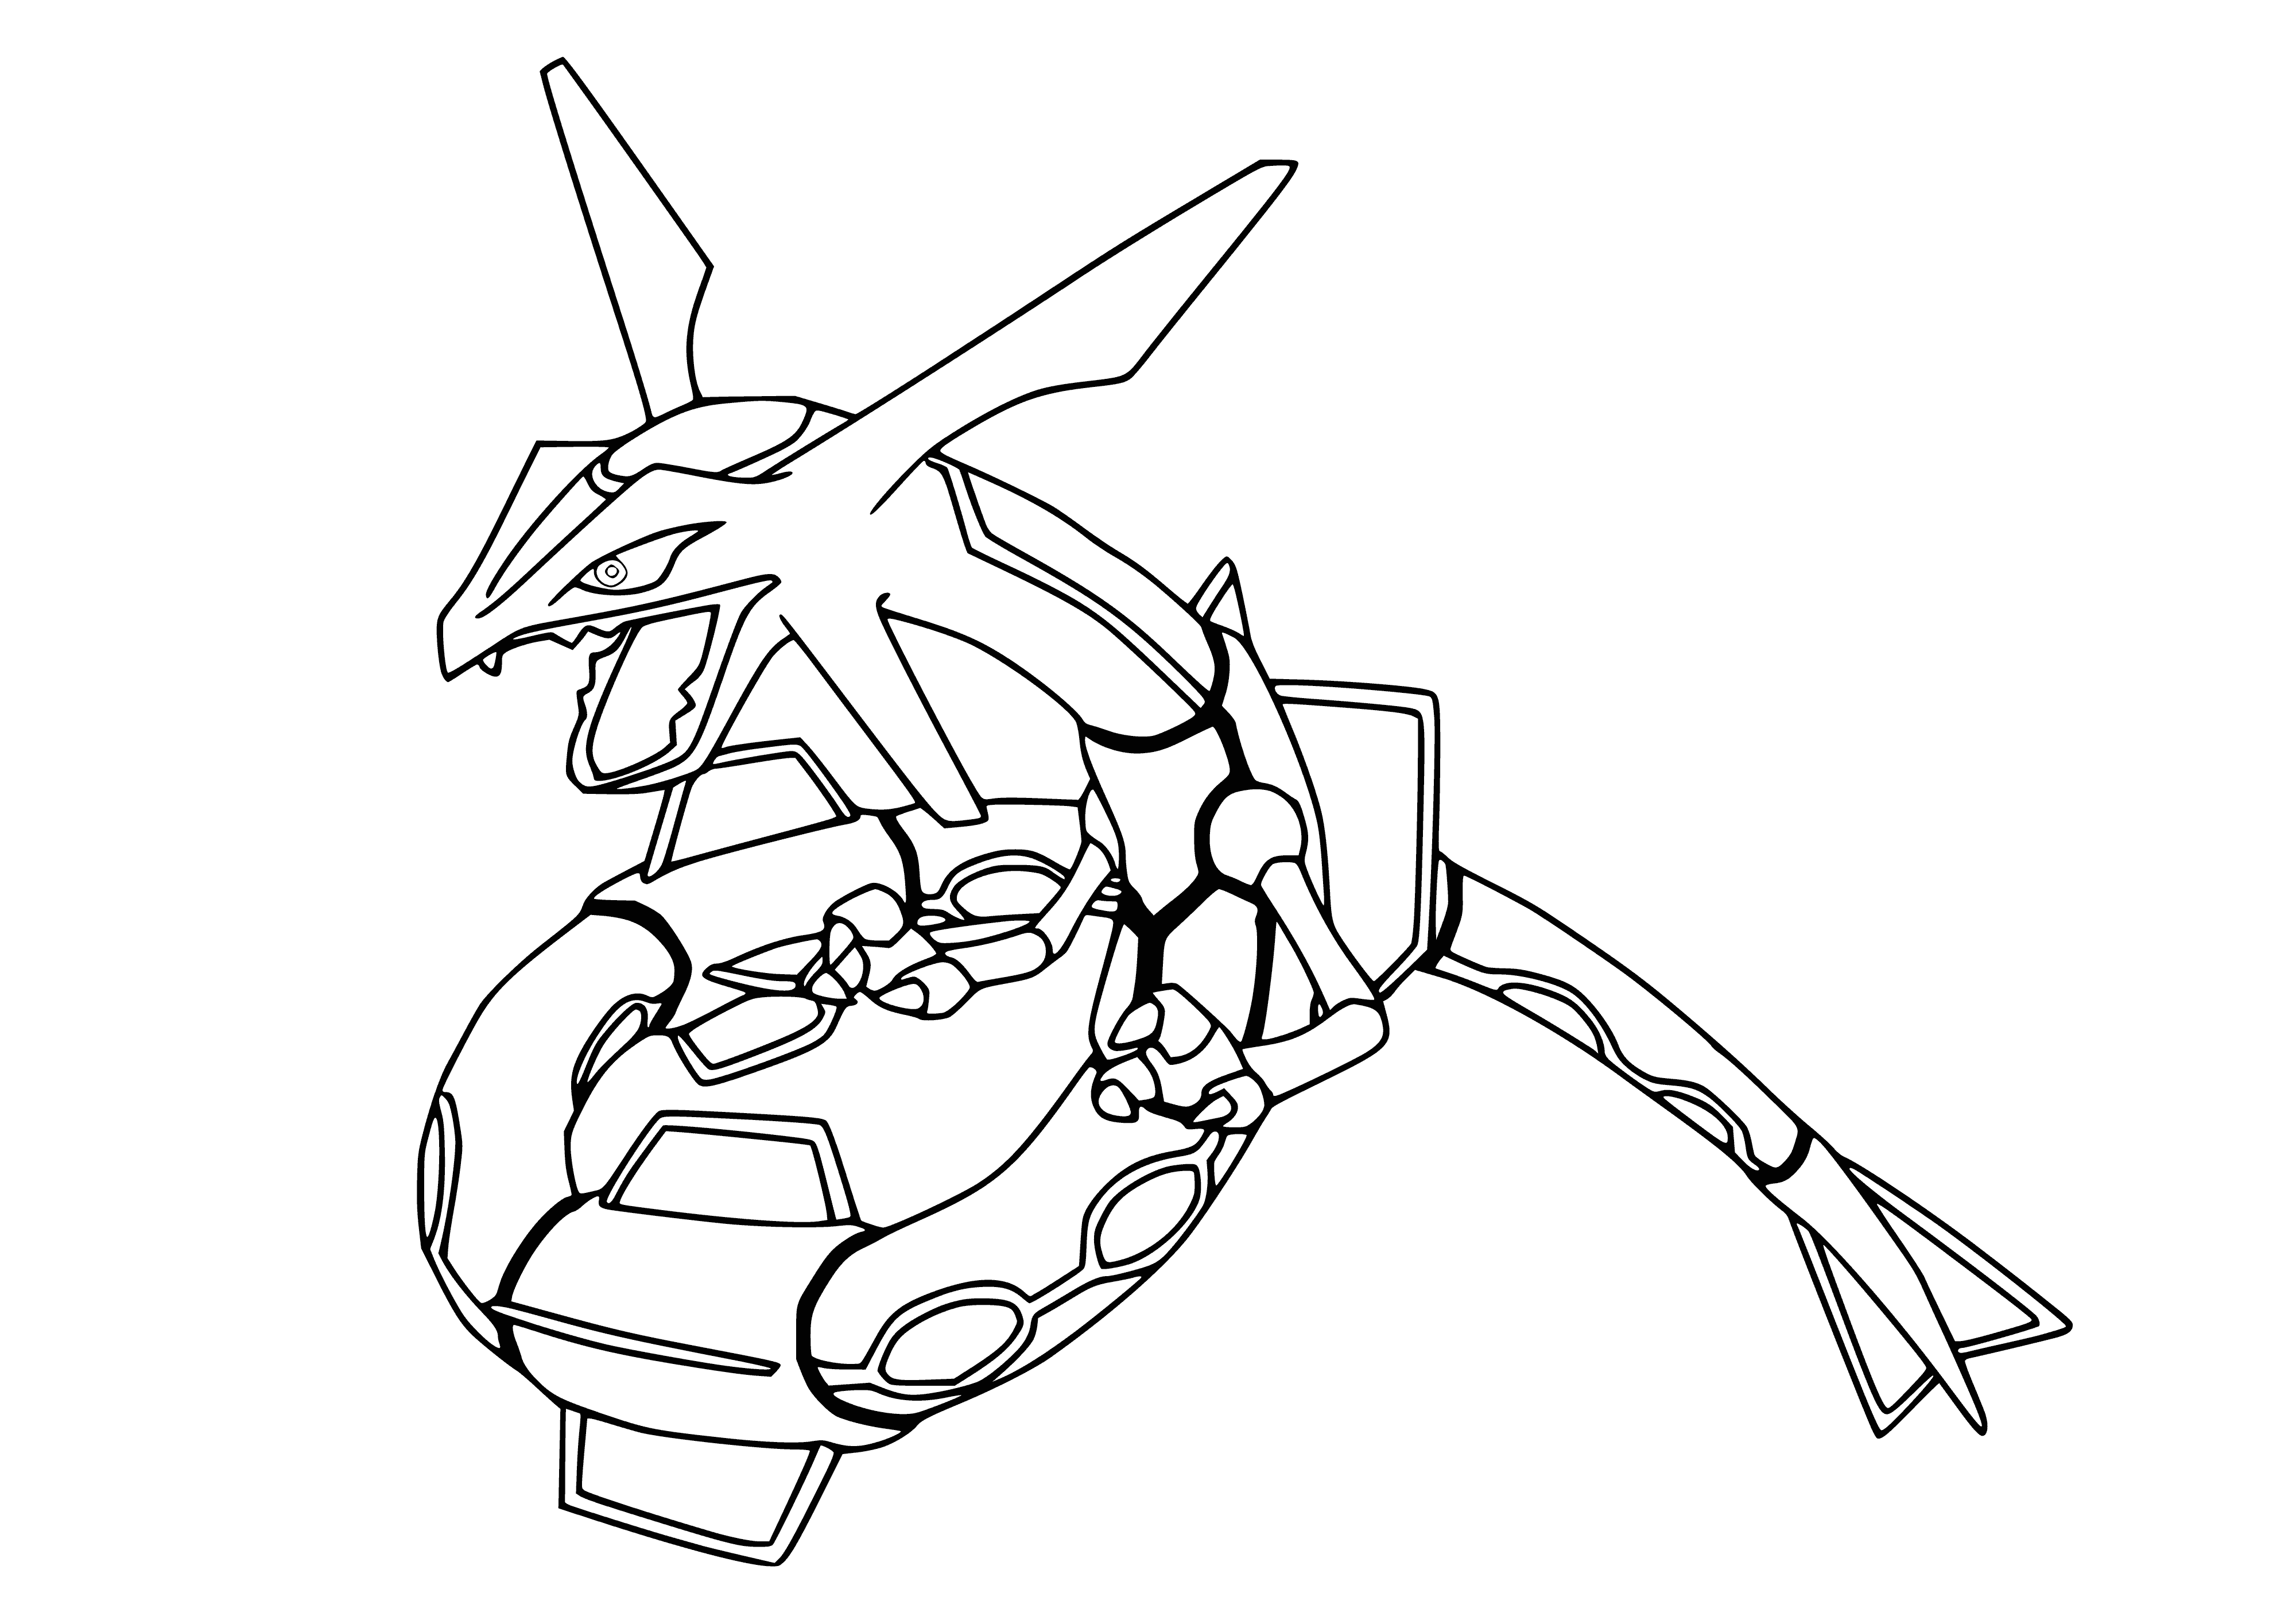 Legendary Pokemon Rayquaza coloring page